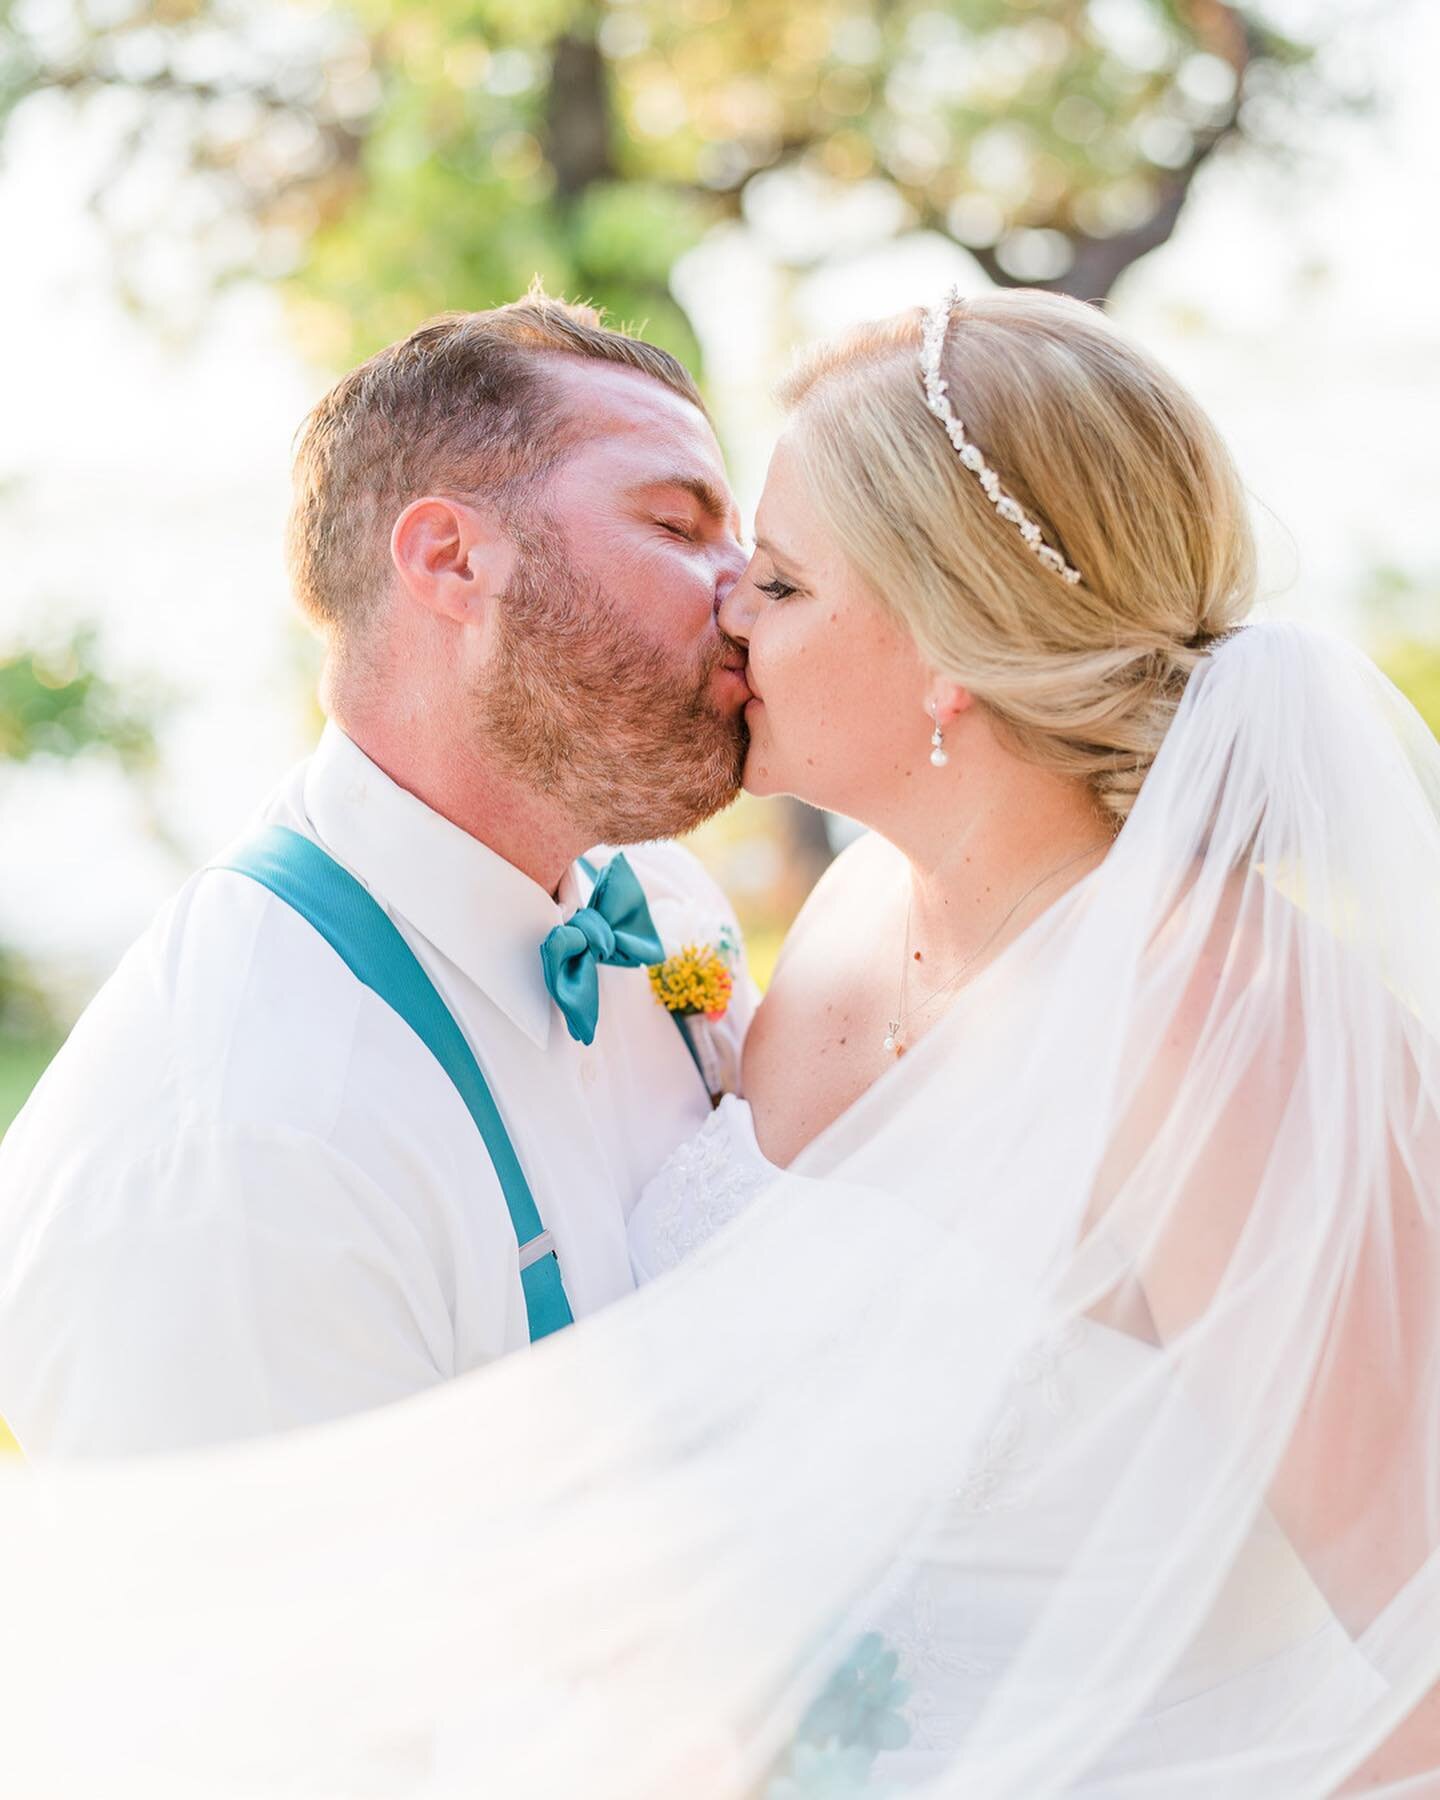 We are back home and it's time for the sneak peek you've been waiting for!! Seriously, give me ALL the waterfront weddings! I can't get enough! We had the most amazing weather, beautiful views, and a gorgeous couple. Here are few to enjoy while I fin